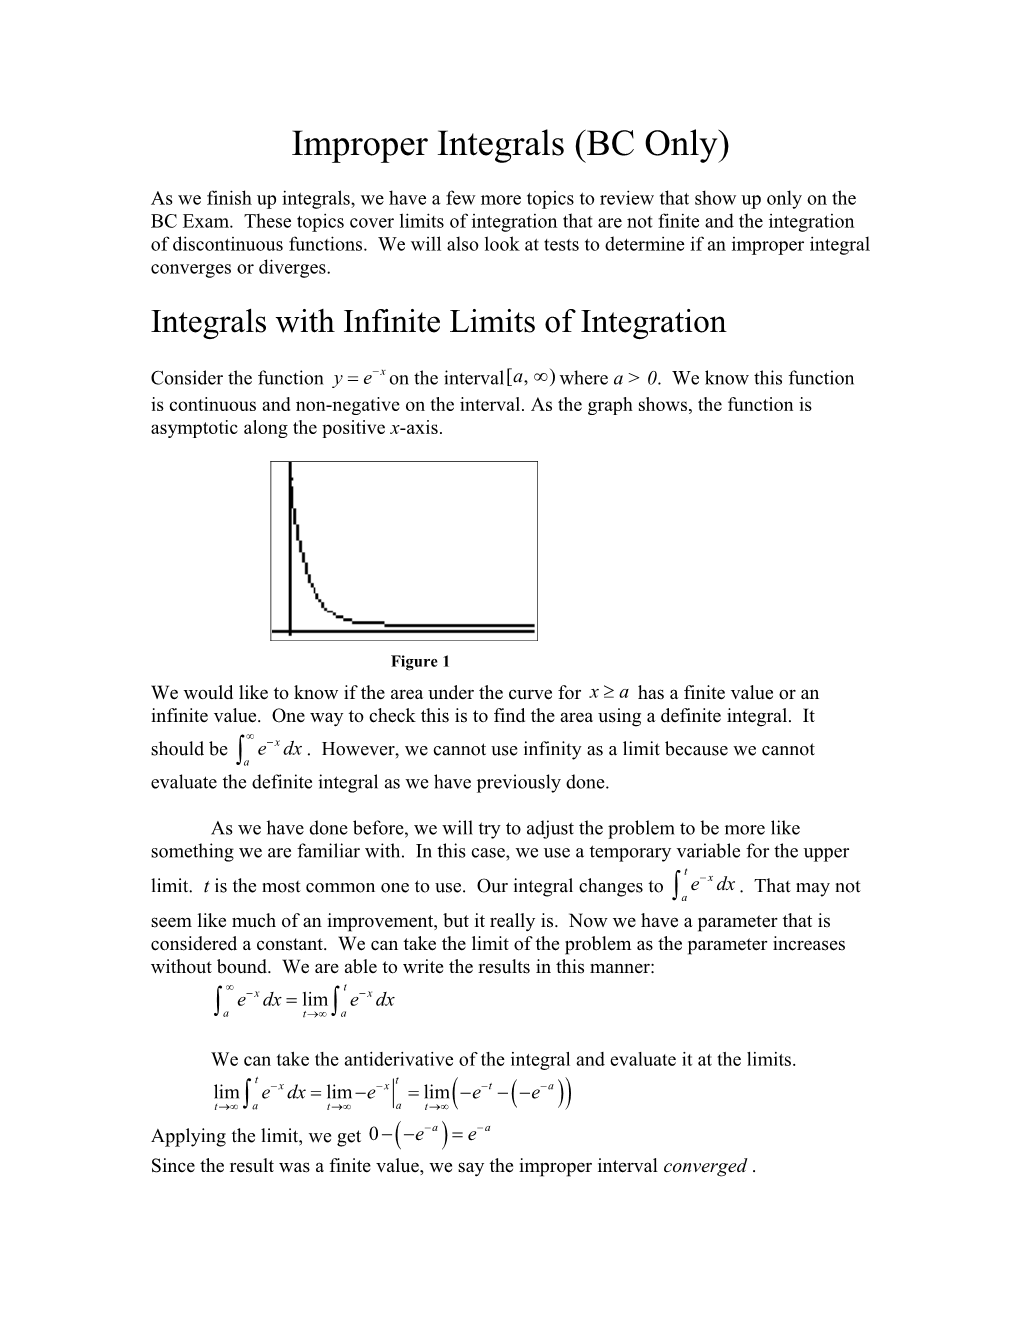 Integrals with Infinite Limits of Integration